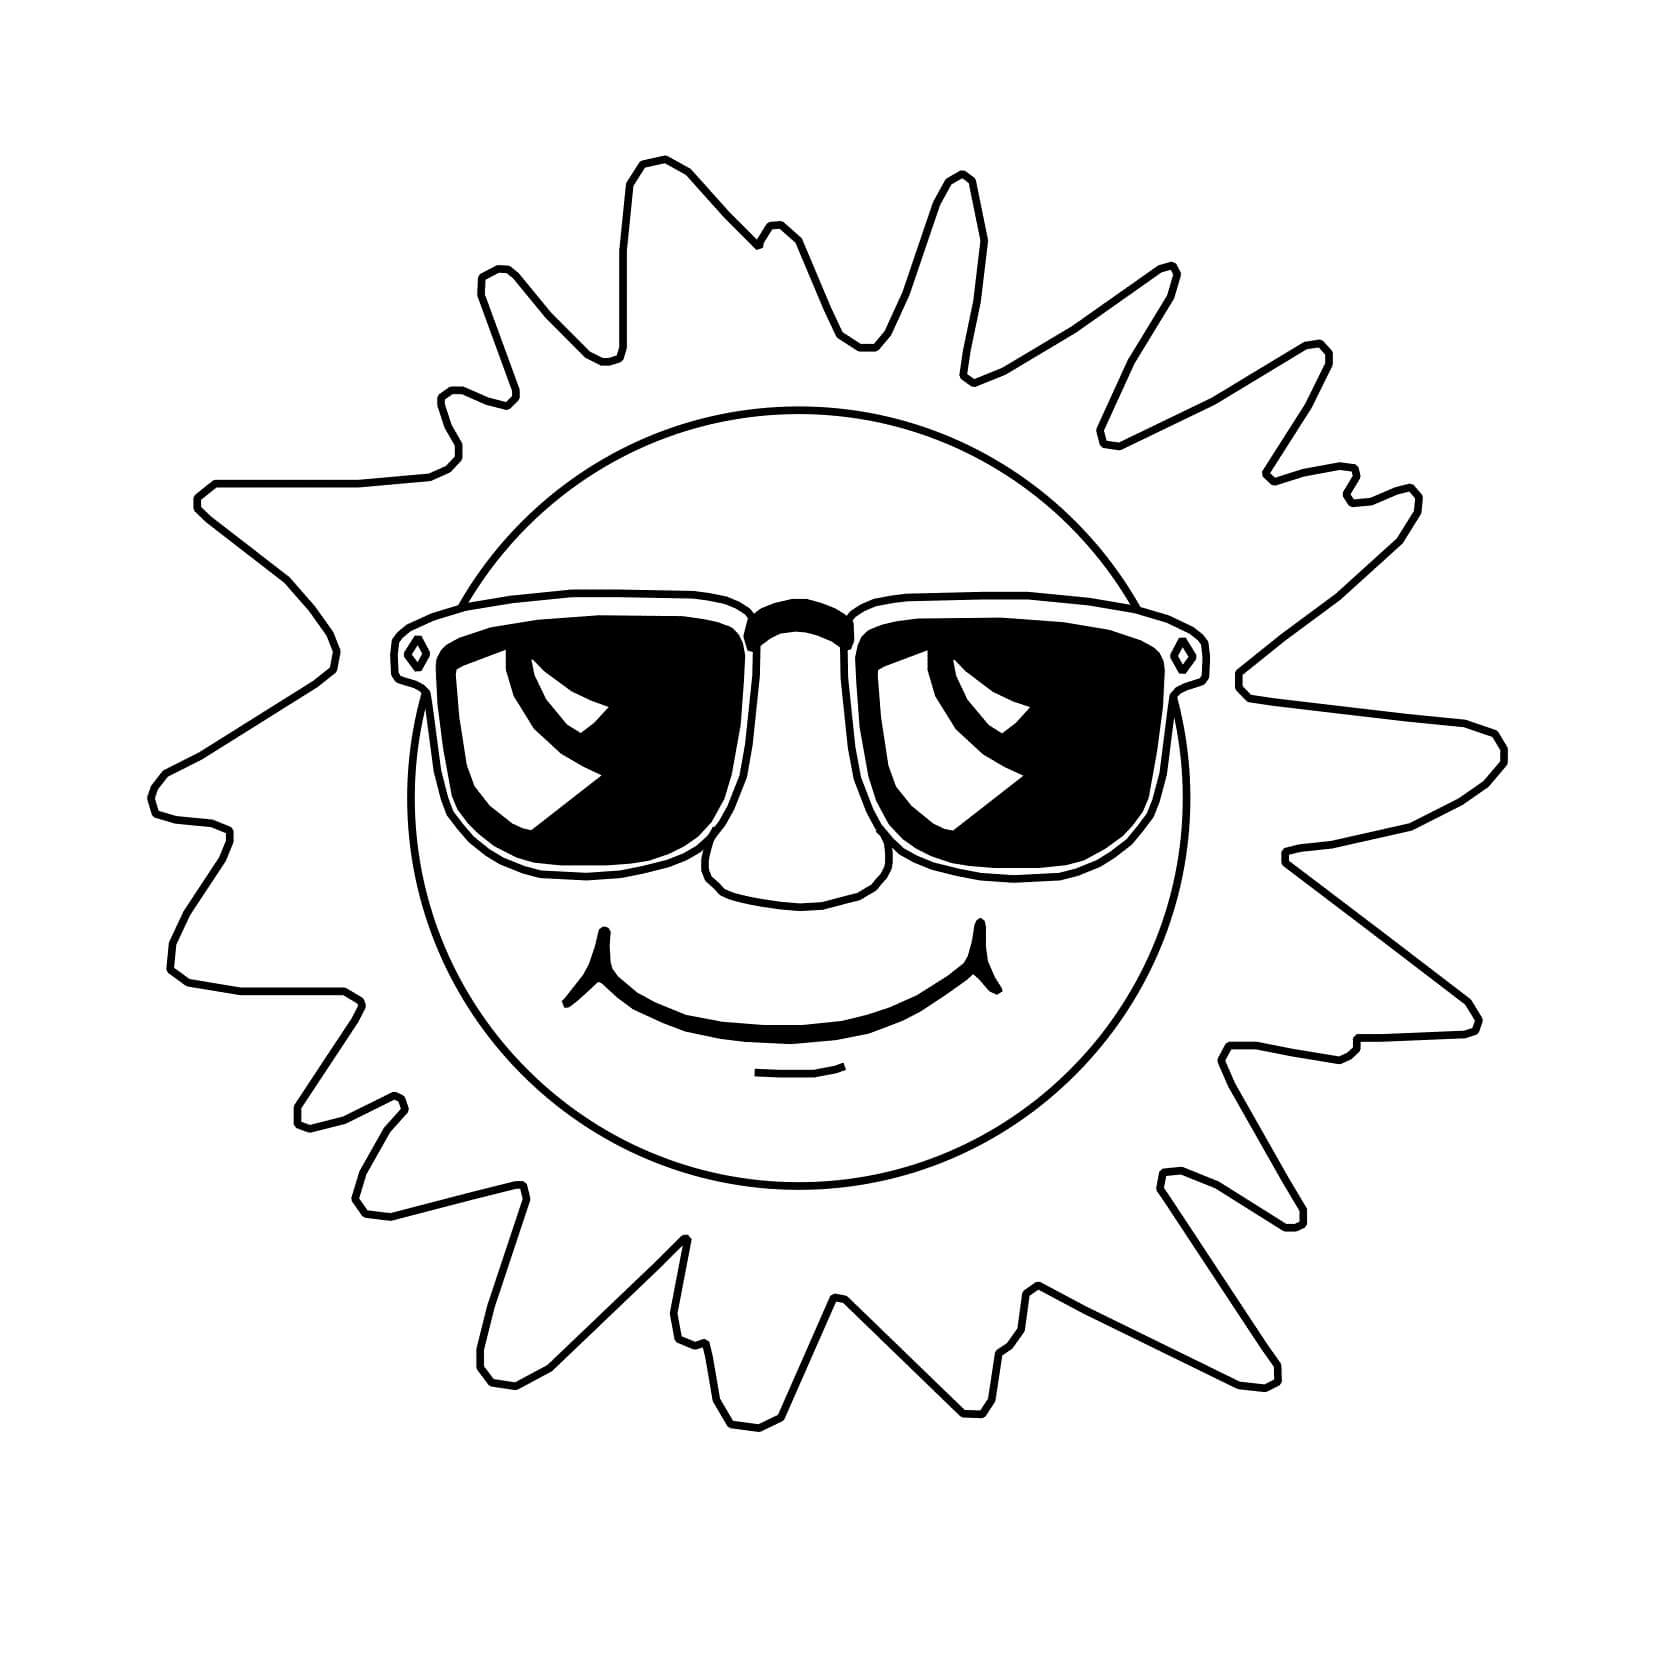 Sun coloring pages